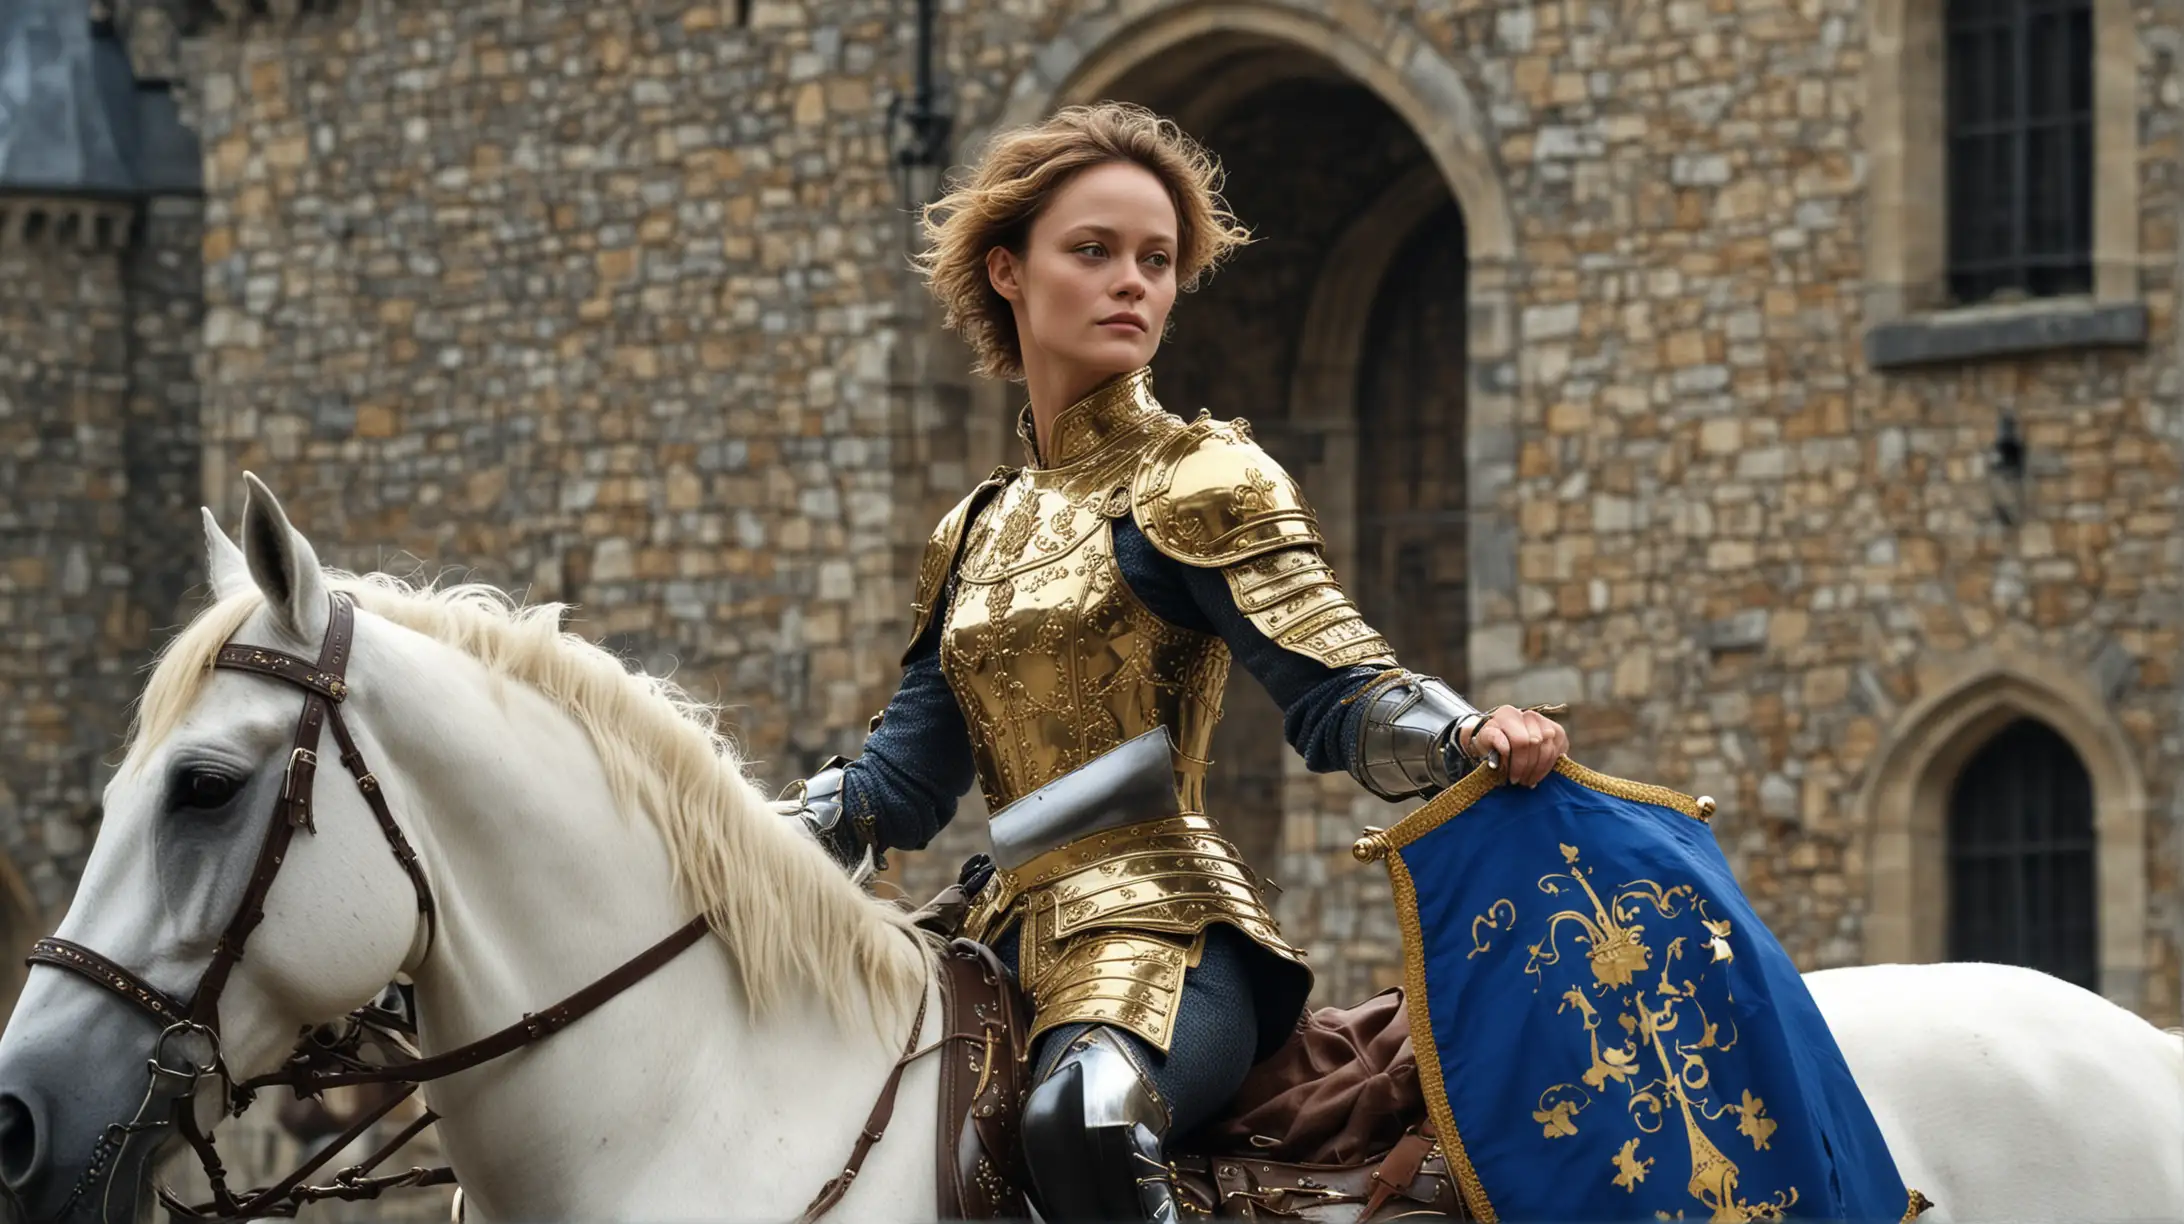 Vanessa Paradis Riding White Horse with French Flag and Knights in Distance